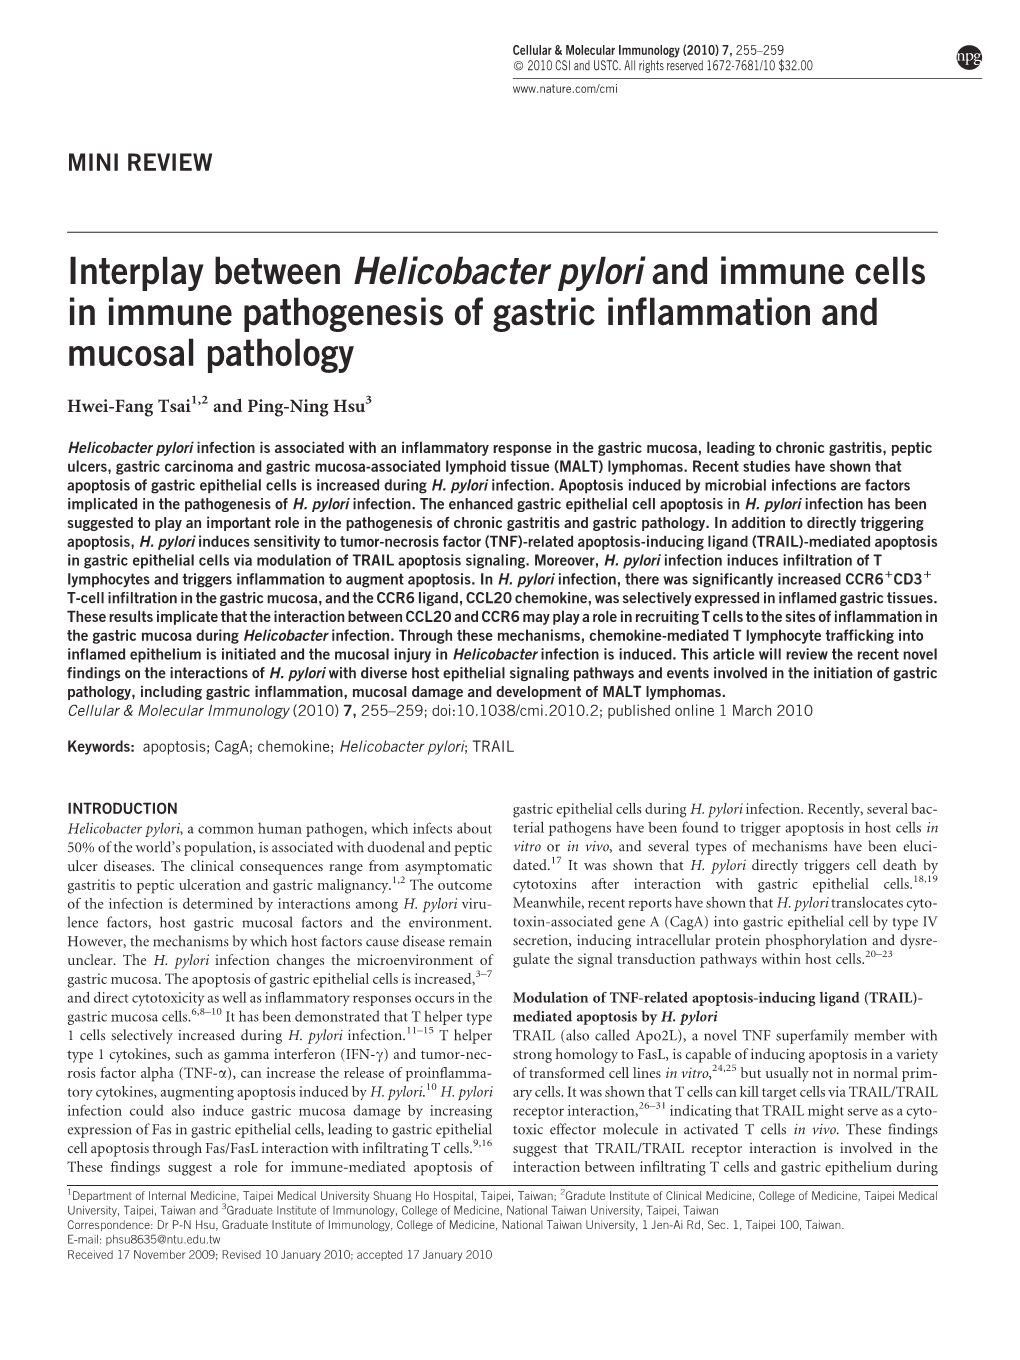 Interplay Between Helicobacter Pylori and Immune Cells in Immune Pathogenesis of Gastric Inflammation and Mucosal Pathology